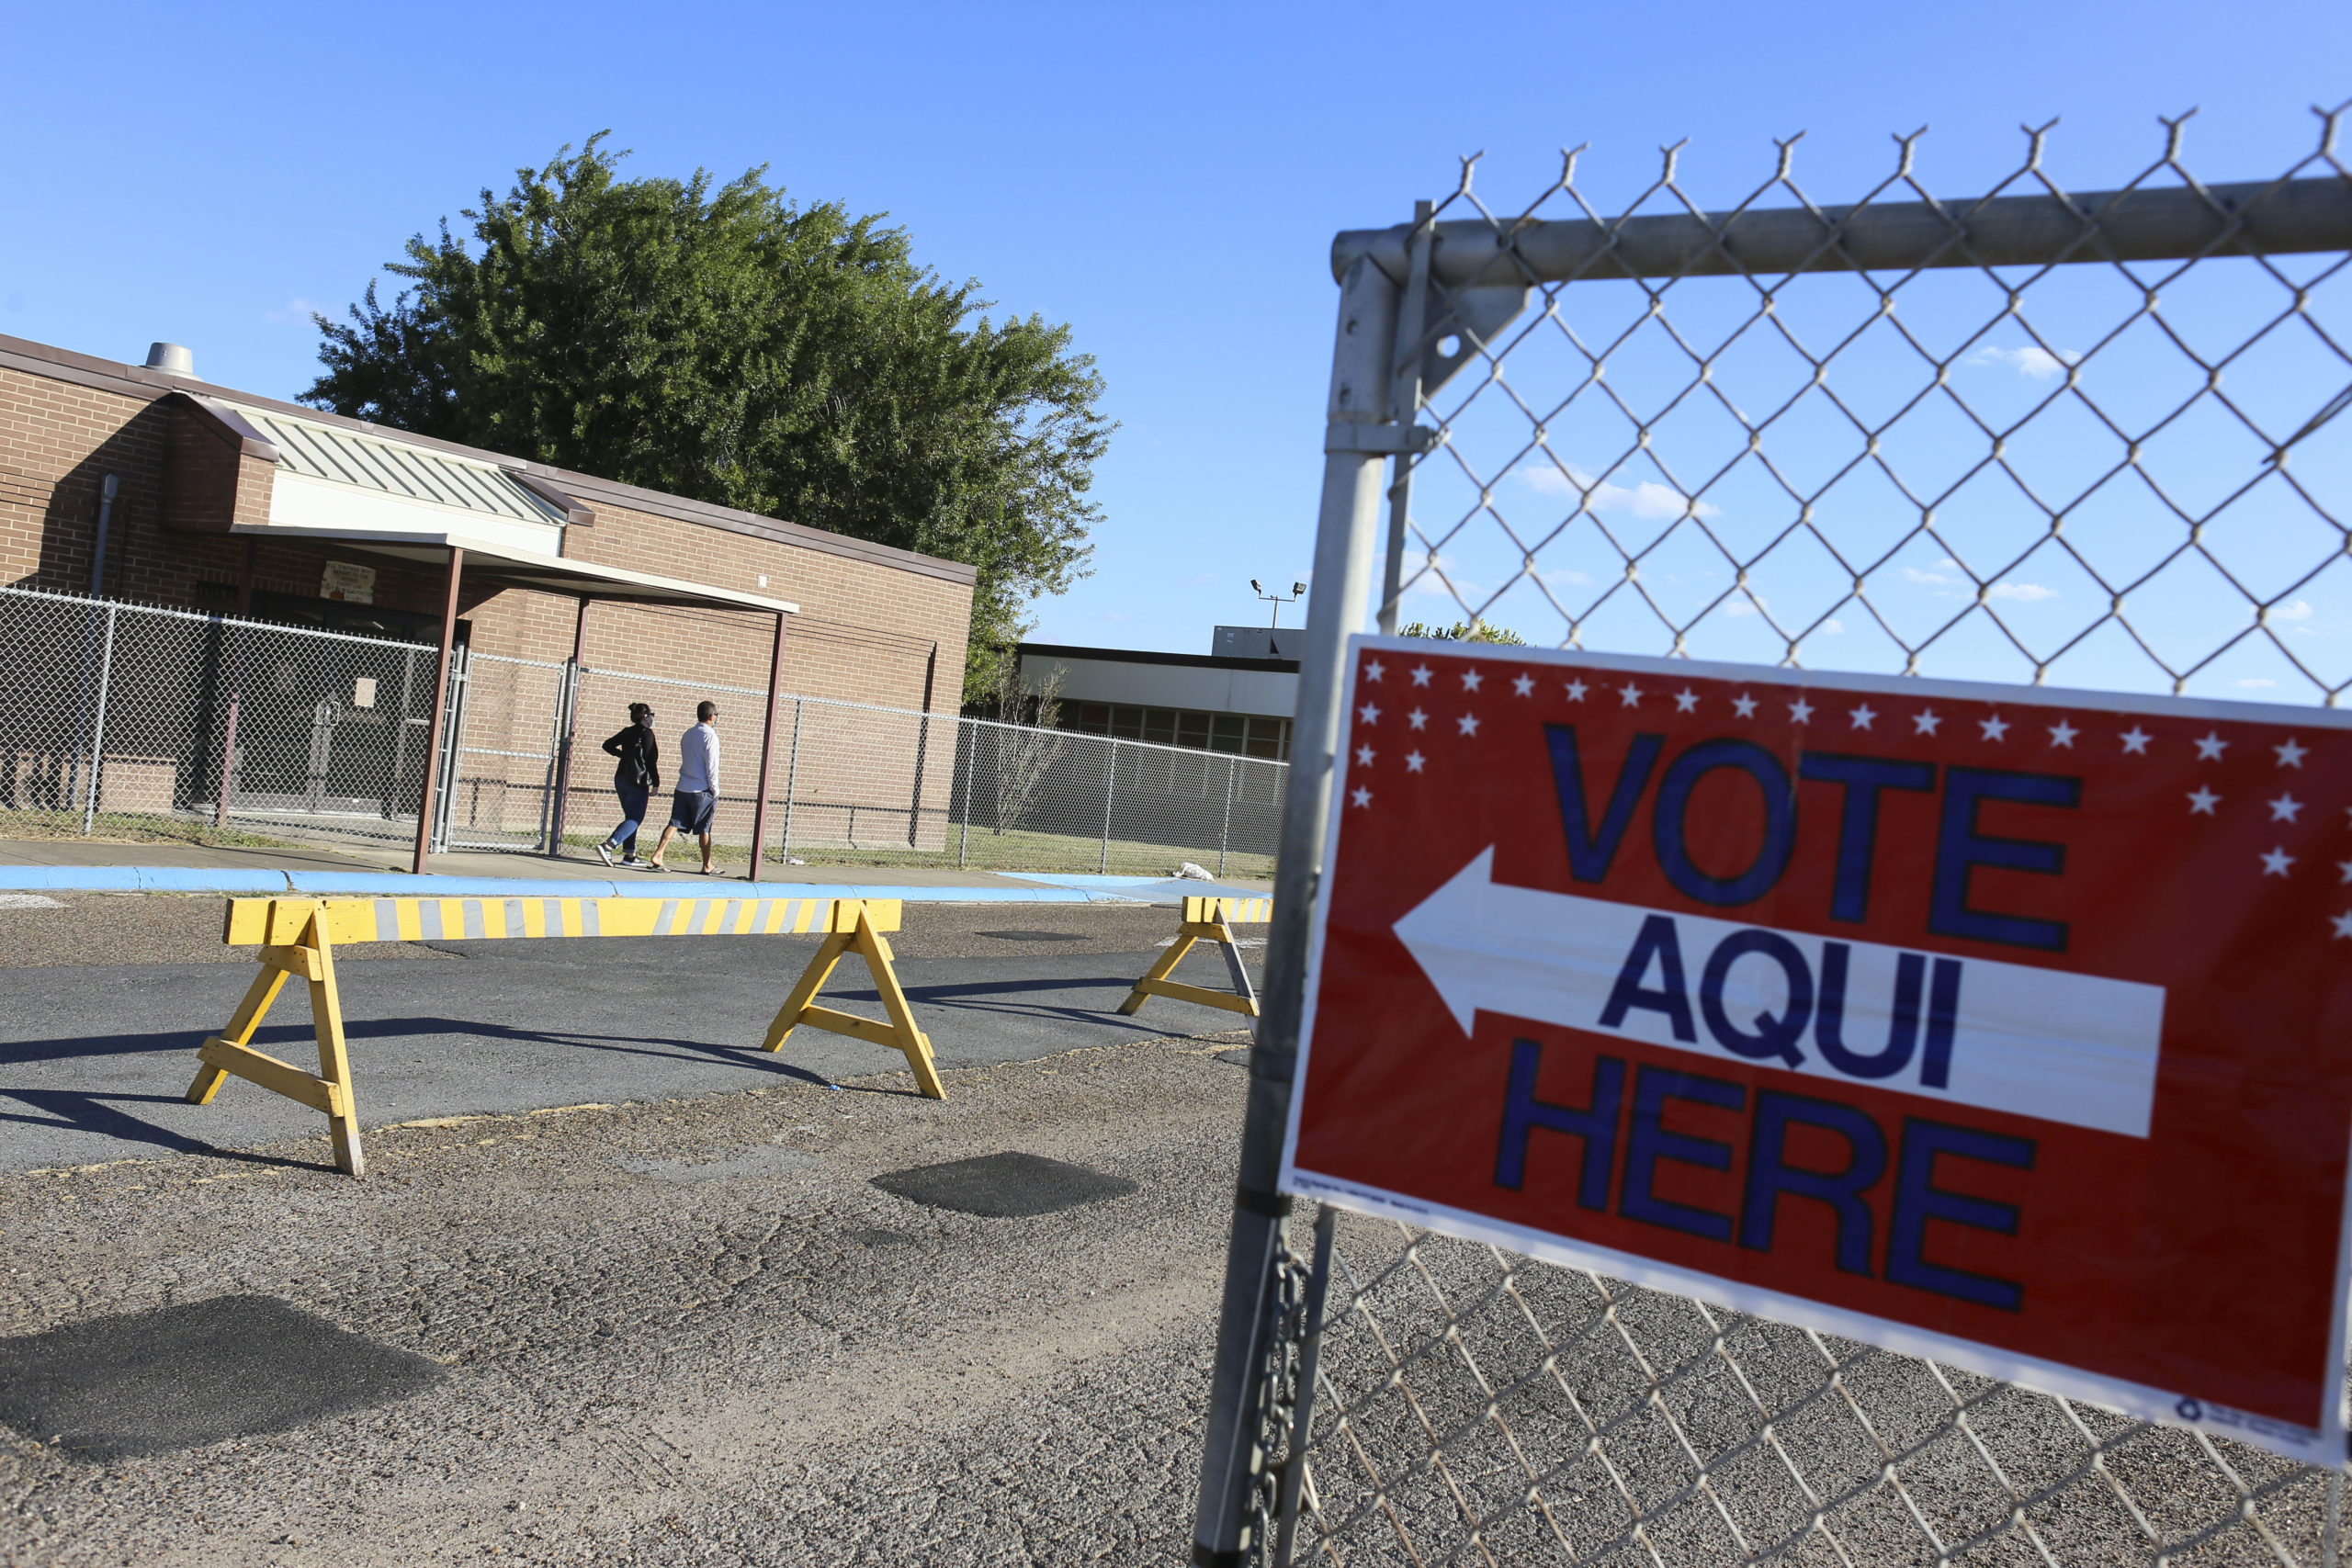 Voters walk through the gates to the polling site entrance Tuesday, Nov. 3, 2020, at Burns Elementary School in Brownsville, Texas.(Denise Cathey/The Brownsville Herald via AP)